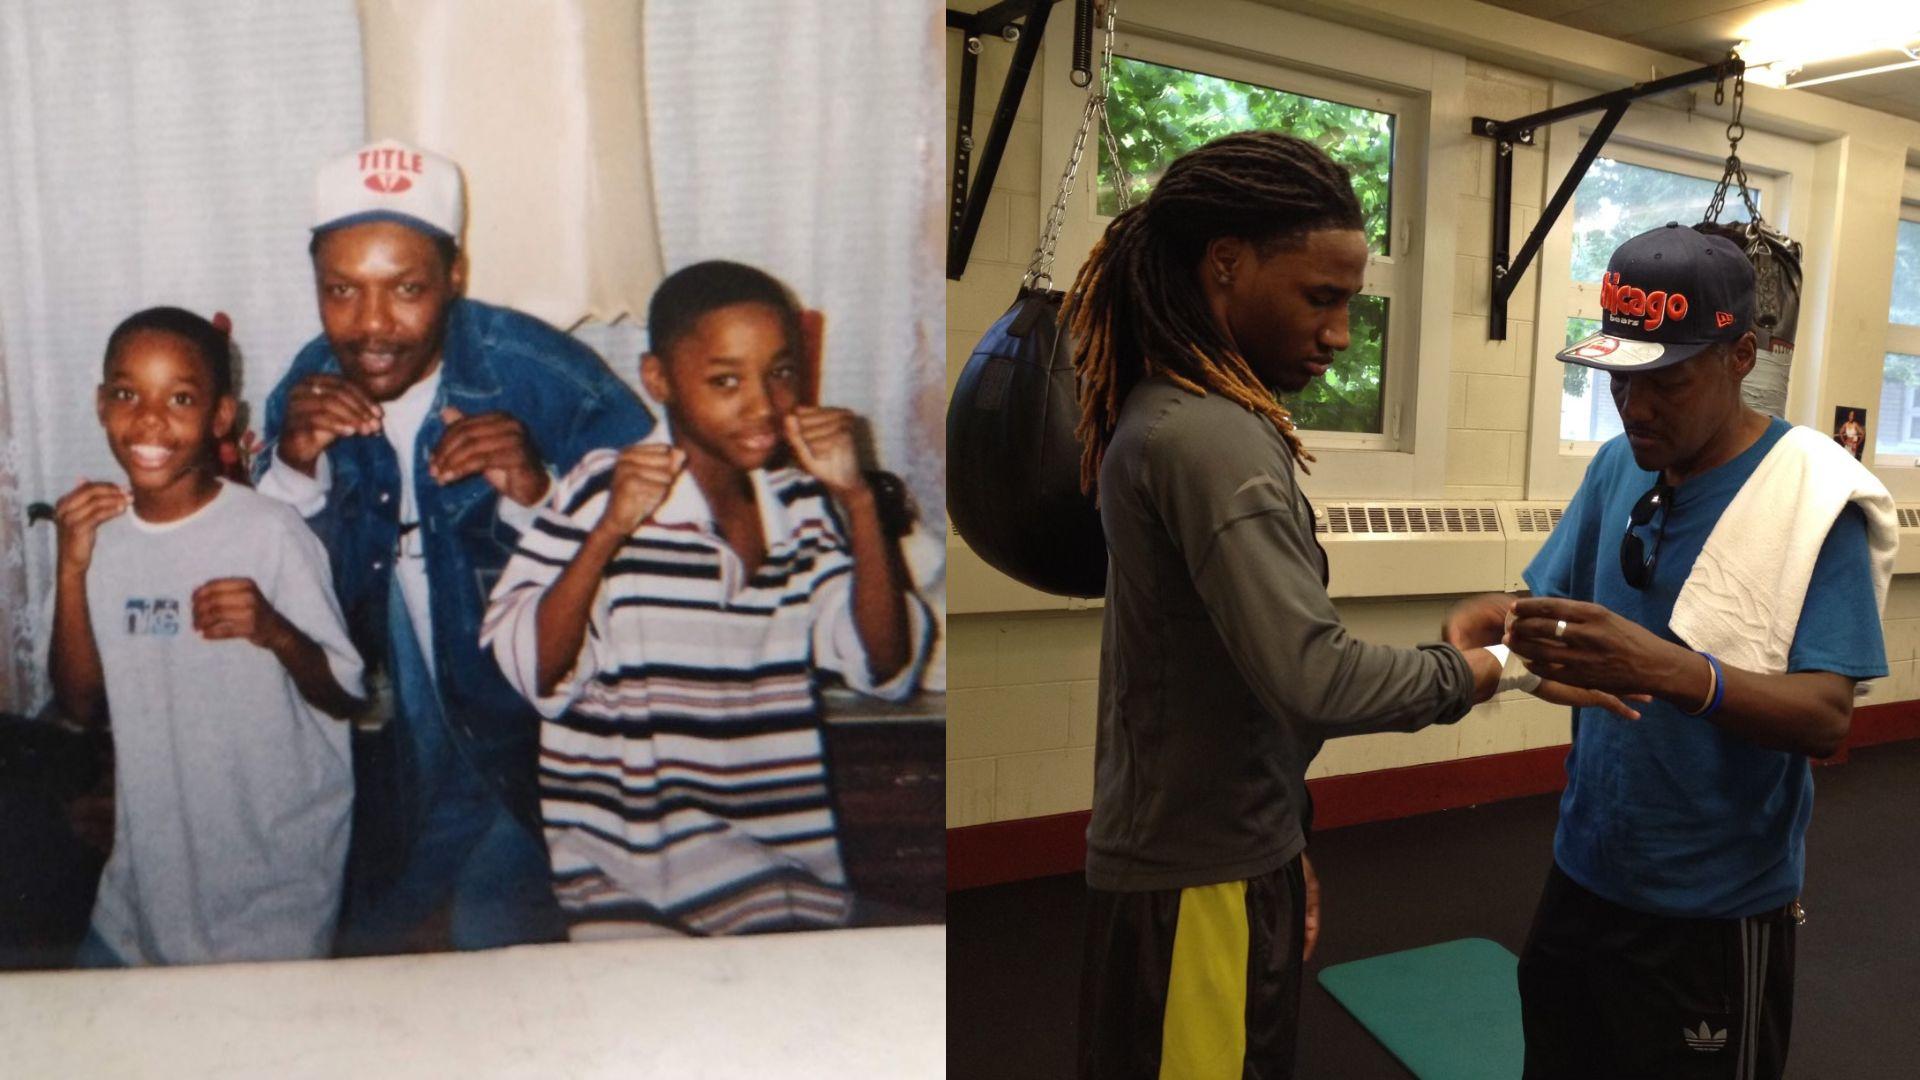 Frank smith taught thousands of children and teenagers, showing them the ropes as a chicago park district boxing coach. (contributed by frank smith)